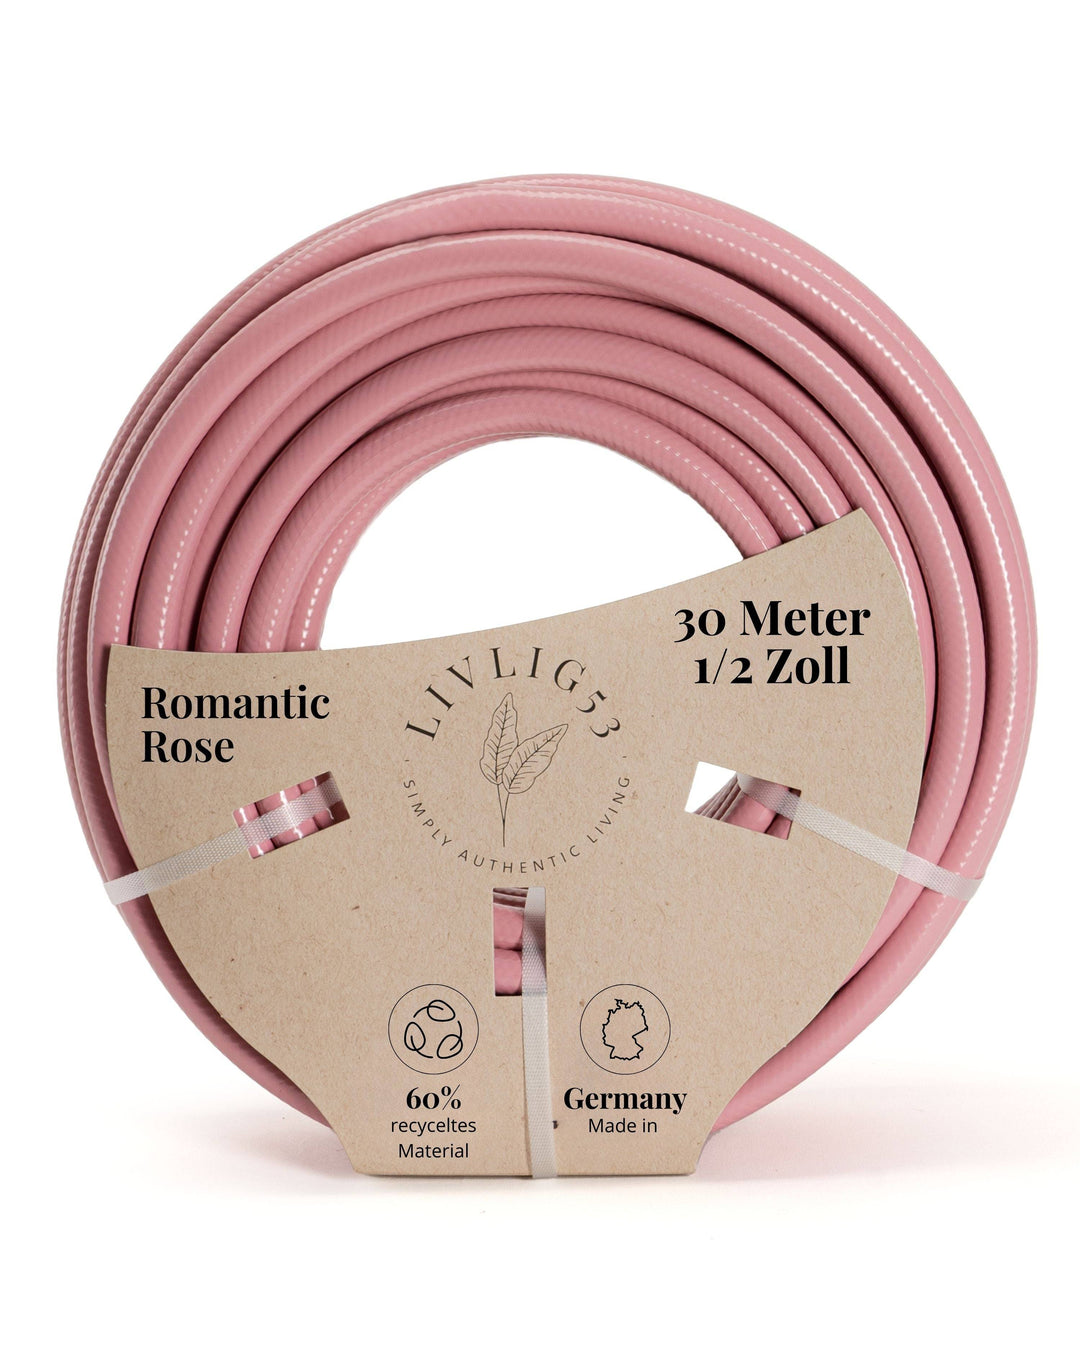 a pink garden hose on a white background